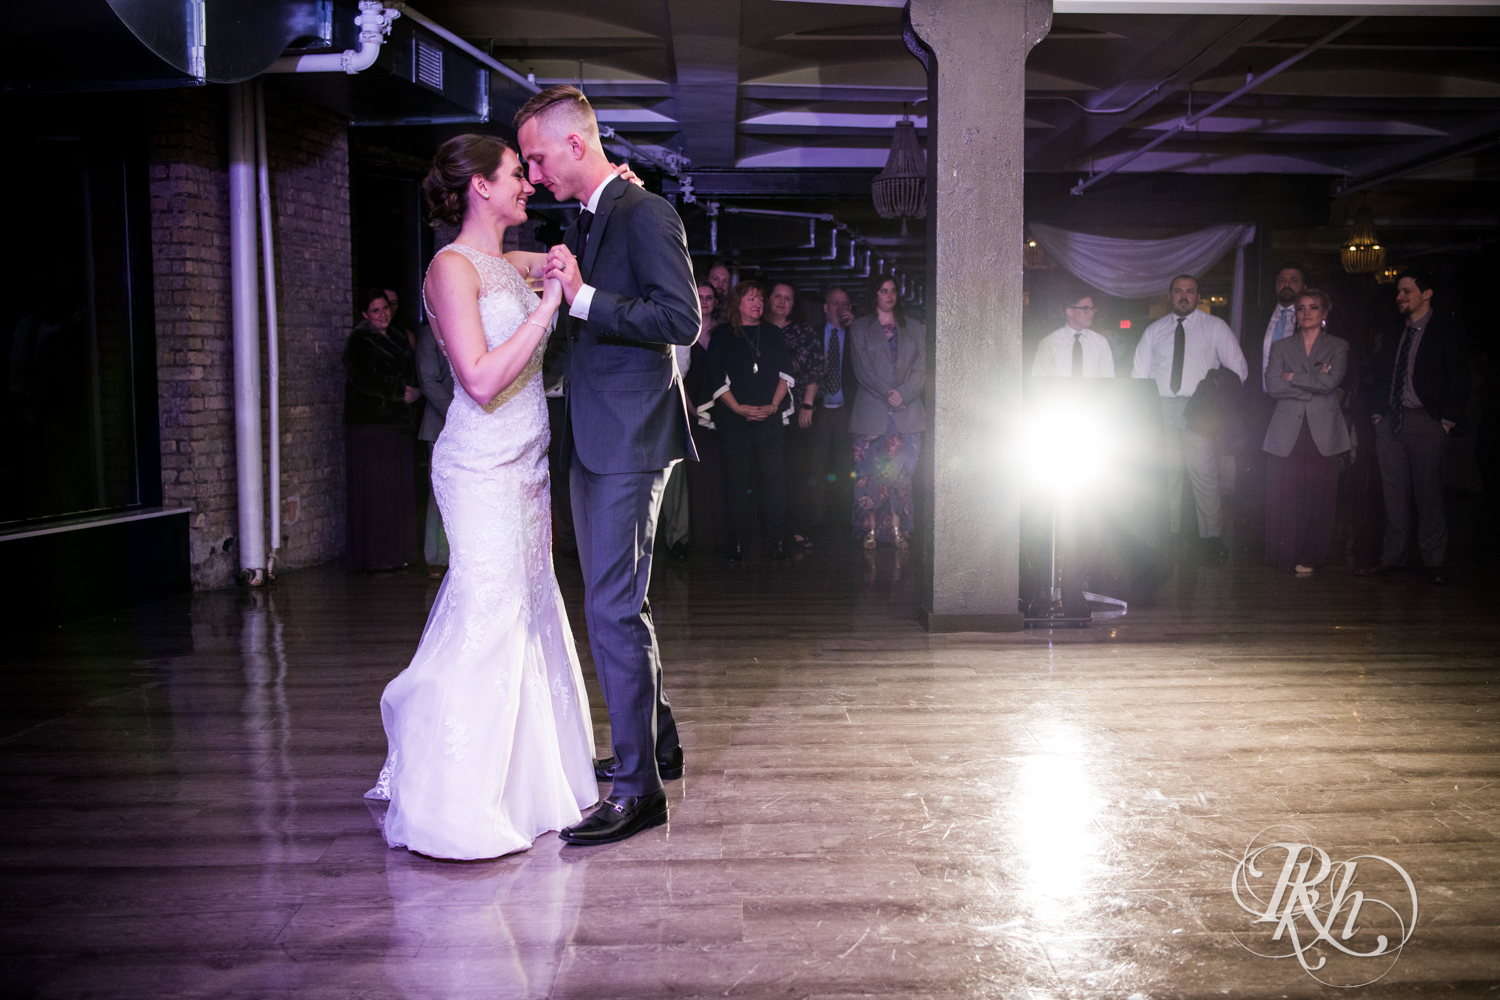 Bride and groom share first dance at wedding reception at Lumber Exchange Event Center in Minneapolis, Minnesota.